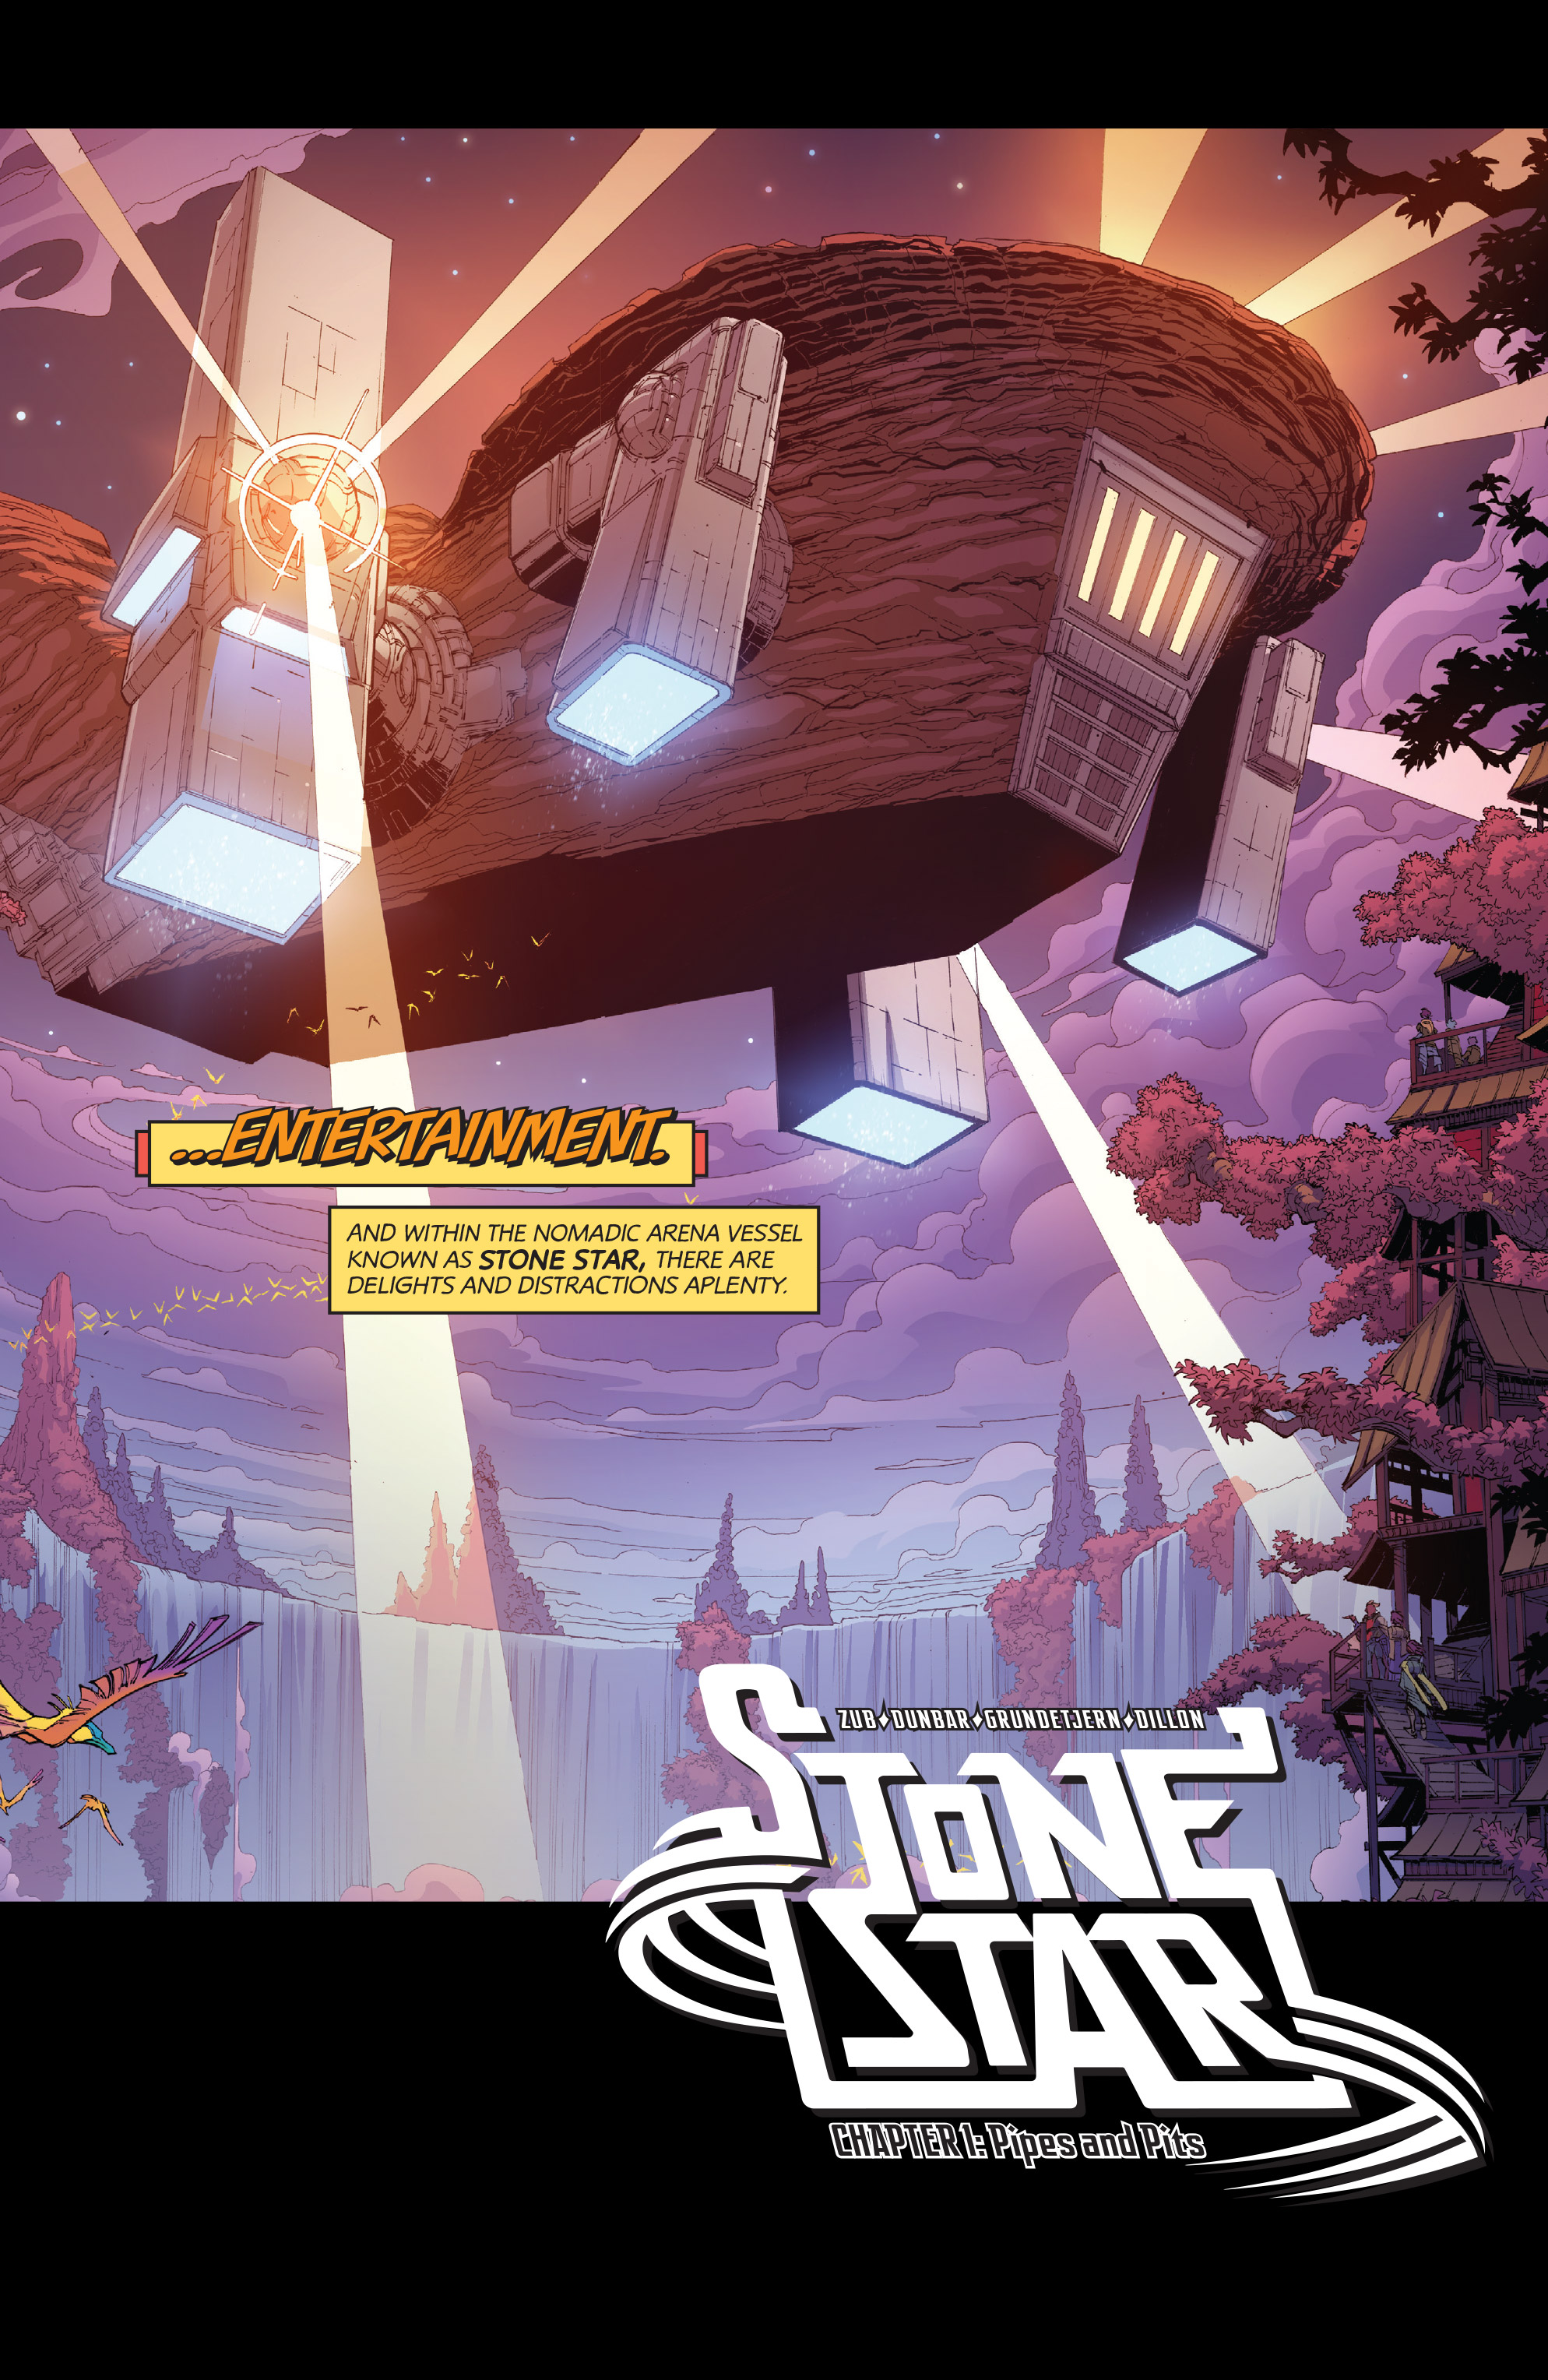 Read online Stone Star comic -  Issue #1 - 4